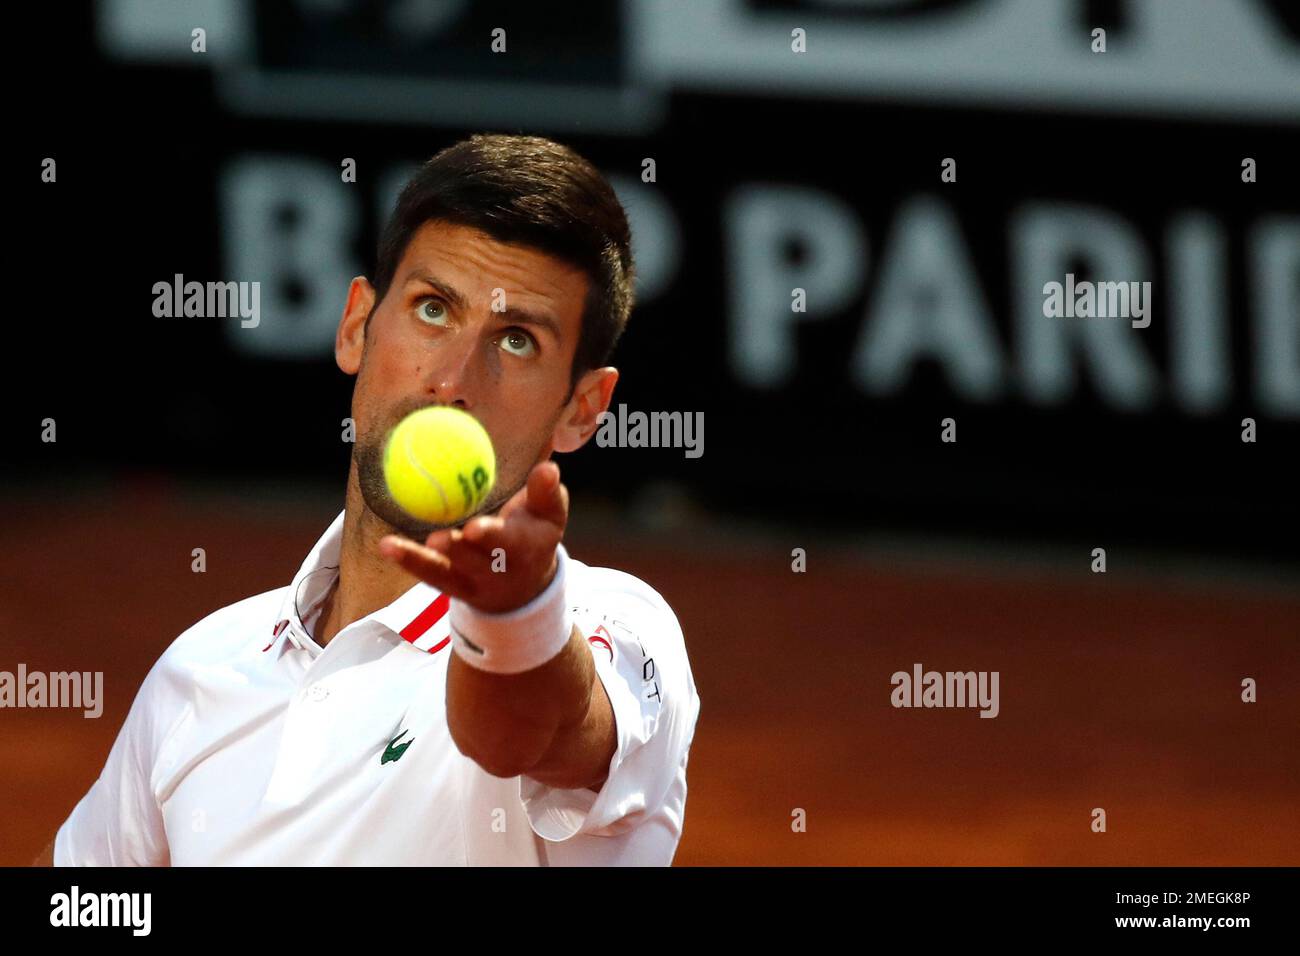 Novak Djokovic of Serbia serves the ball to Taylor Fritz of the United States during their match at the Italian Open tennis tournament, in Rome, Tuesday, May 11, 2021